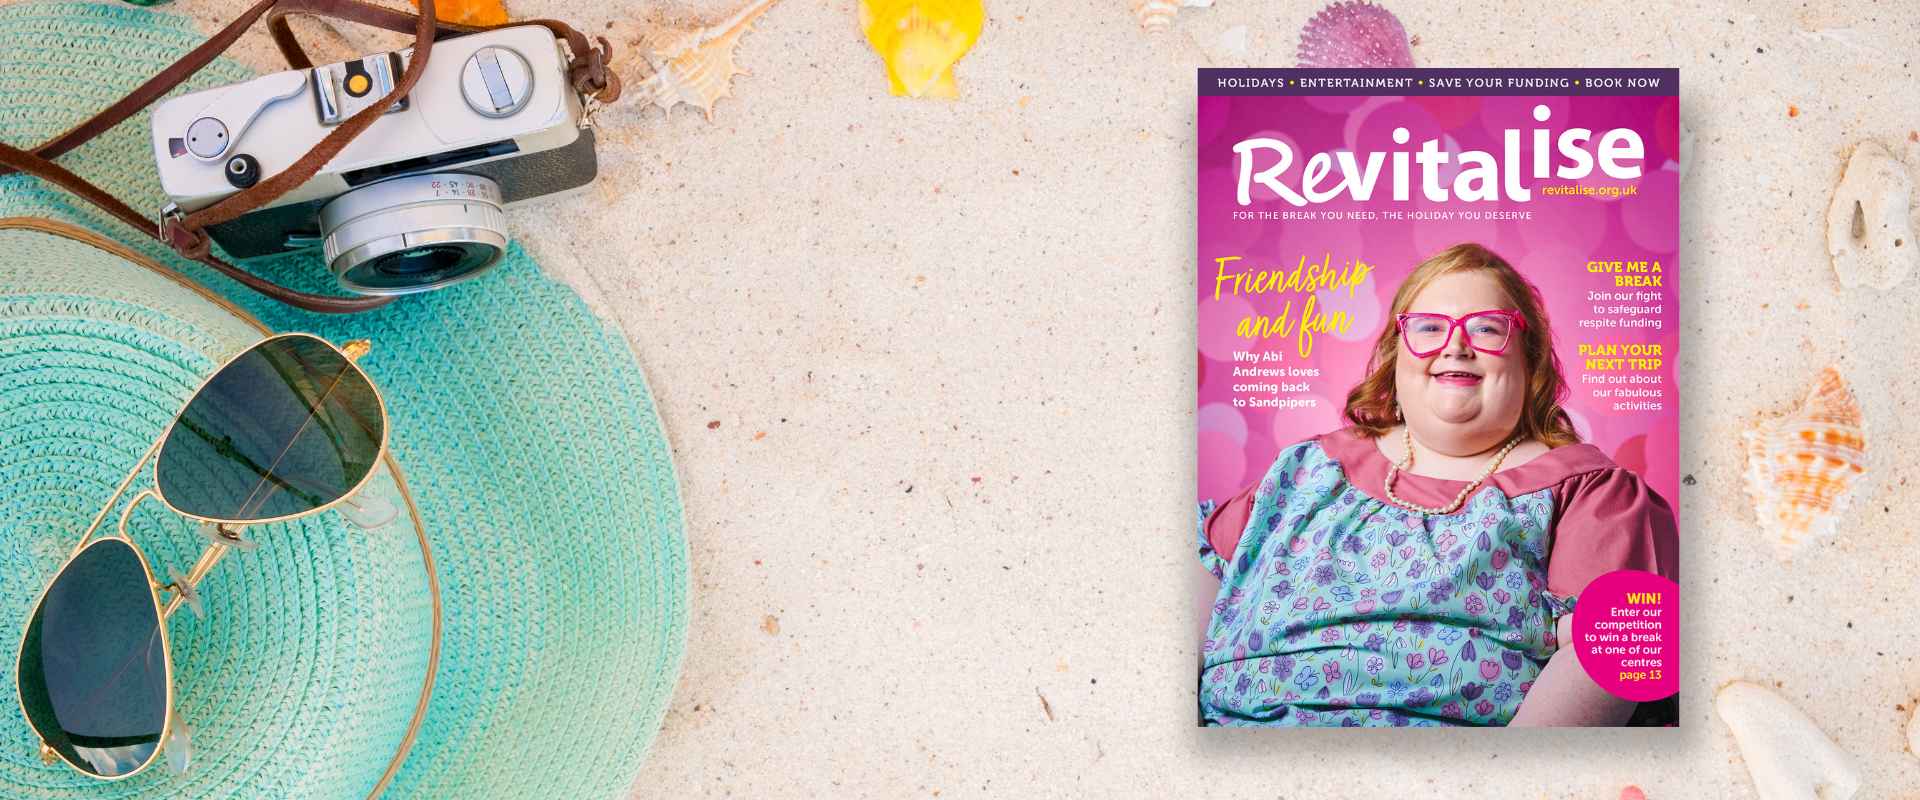 Close up image of sand on a beach along with a sun hat and a camera, suggesting holidays. An image of the front cover of Revitalise spring 2024 magazine is overlayed.